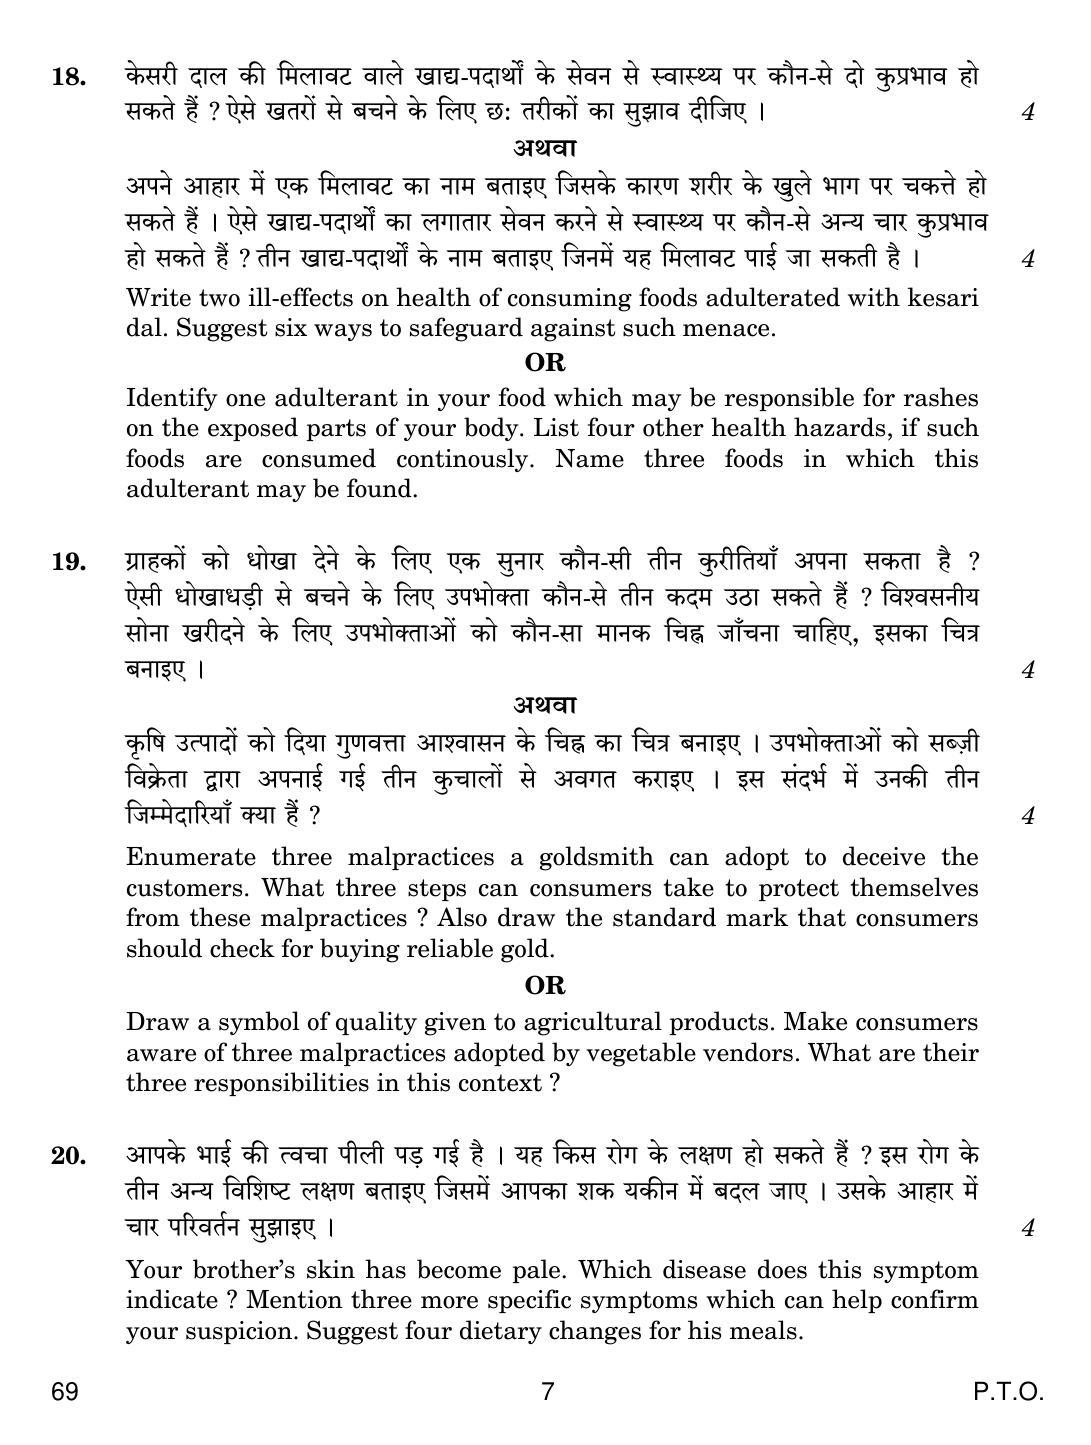 CBSE Class 12 69 Home Science 2019 Question Paper - Page 7